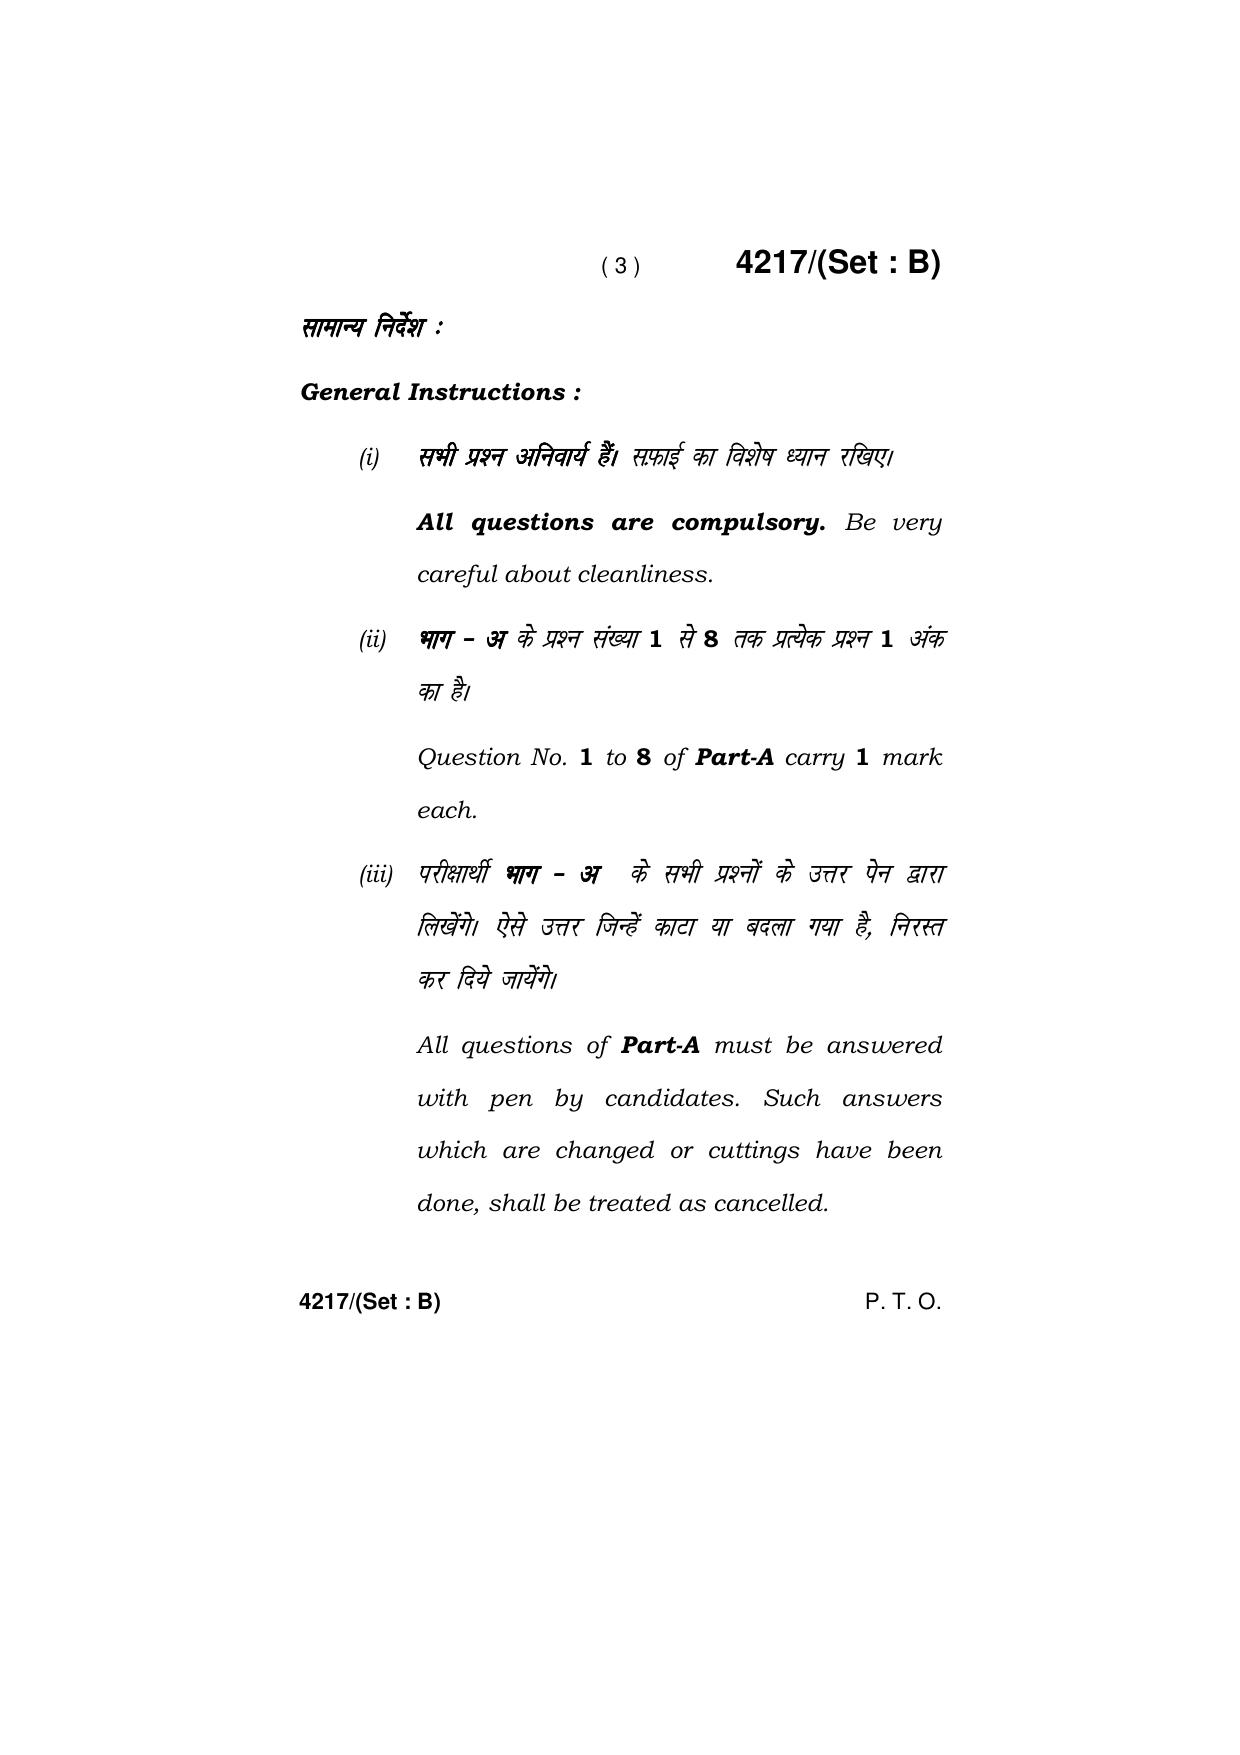 Haryana Board HBSE Class 10 Drawing (All Set) 2019 Question Paper - Page 11